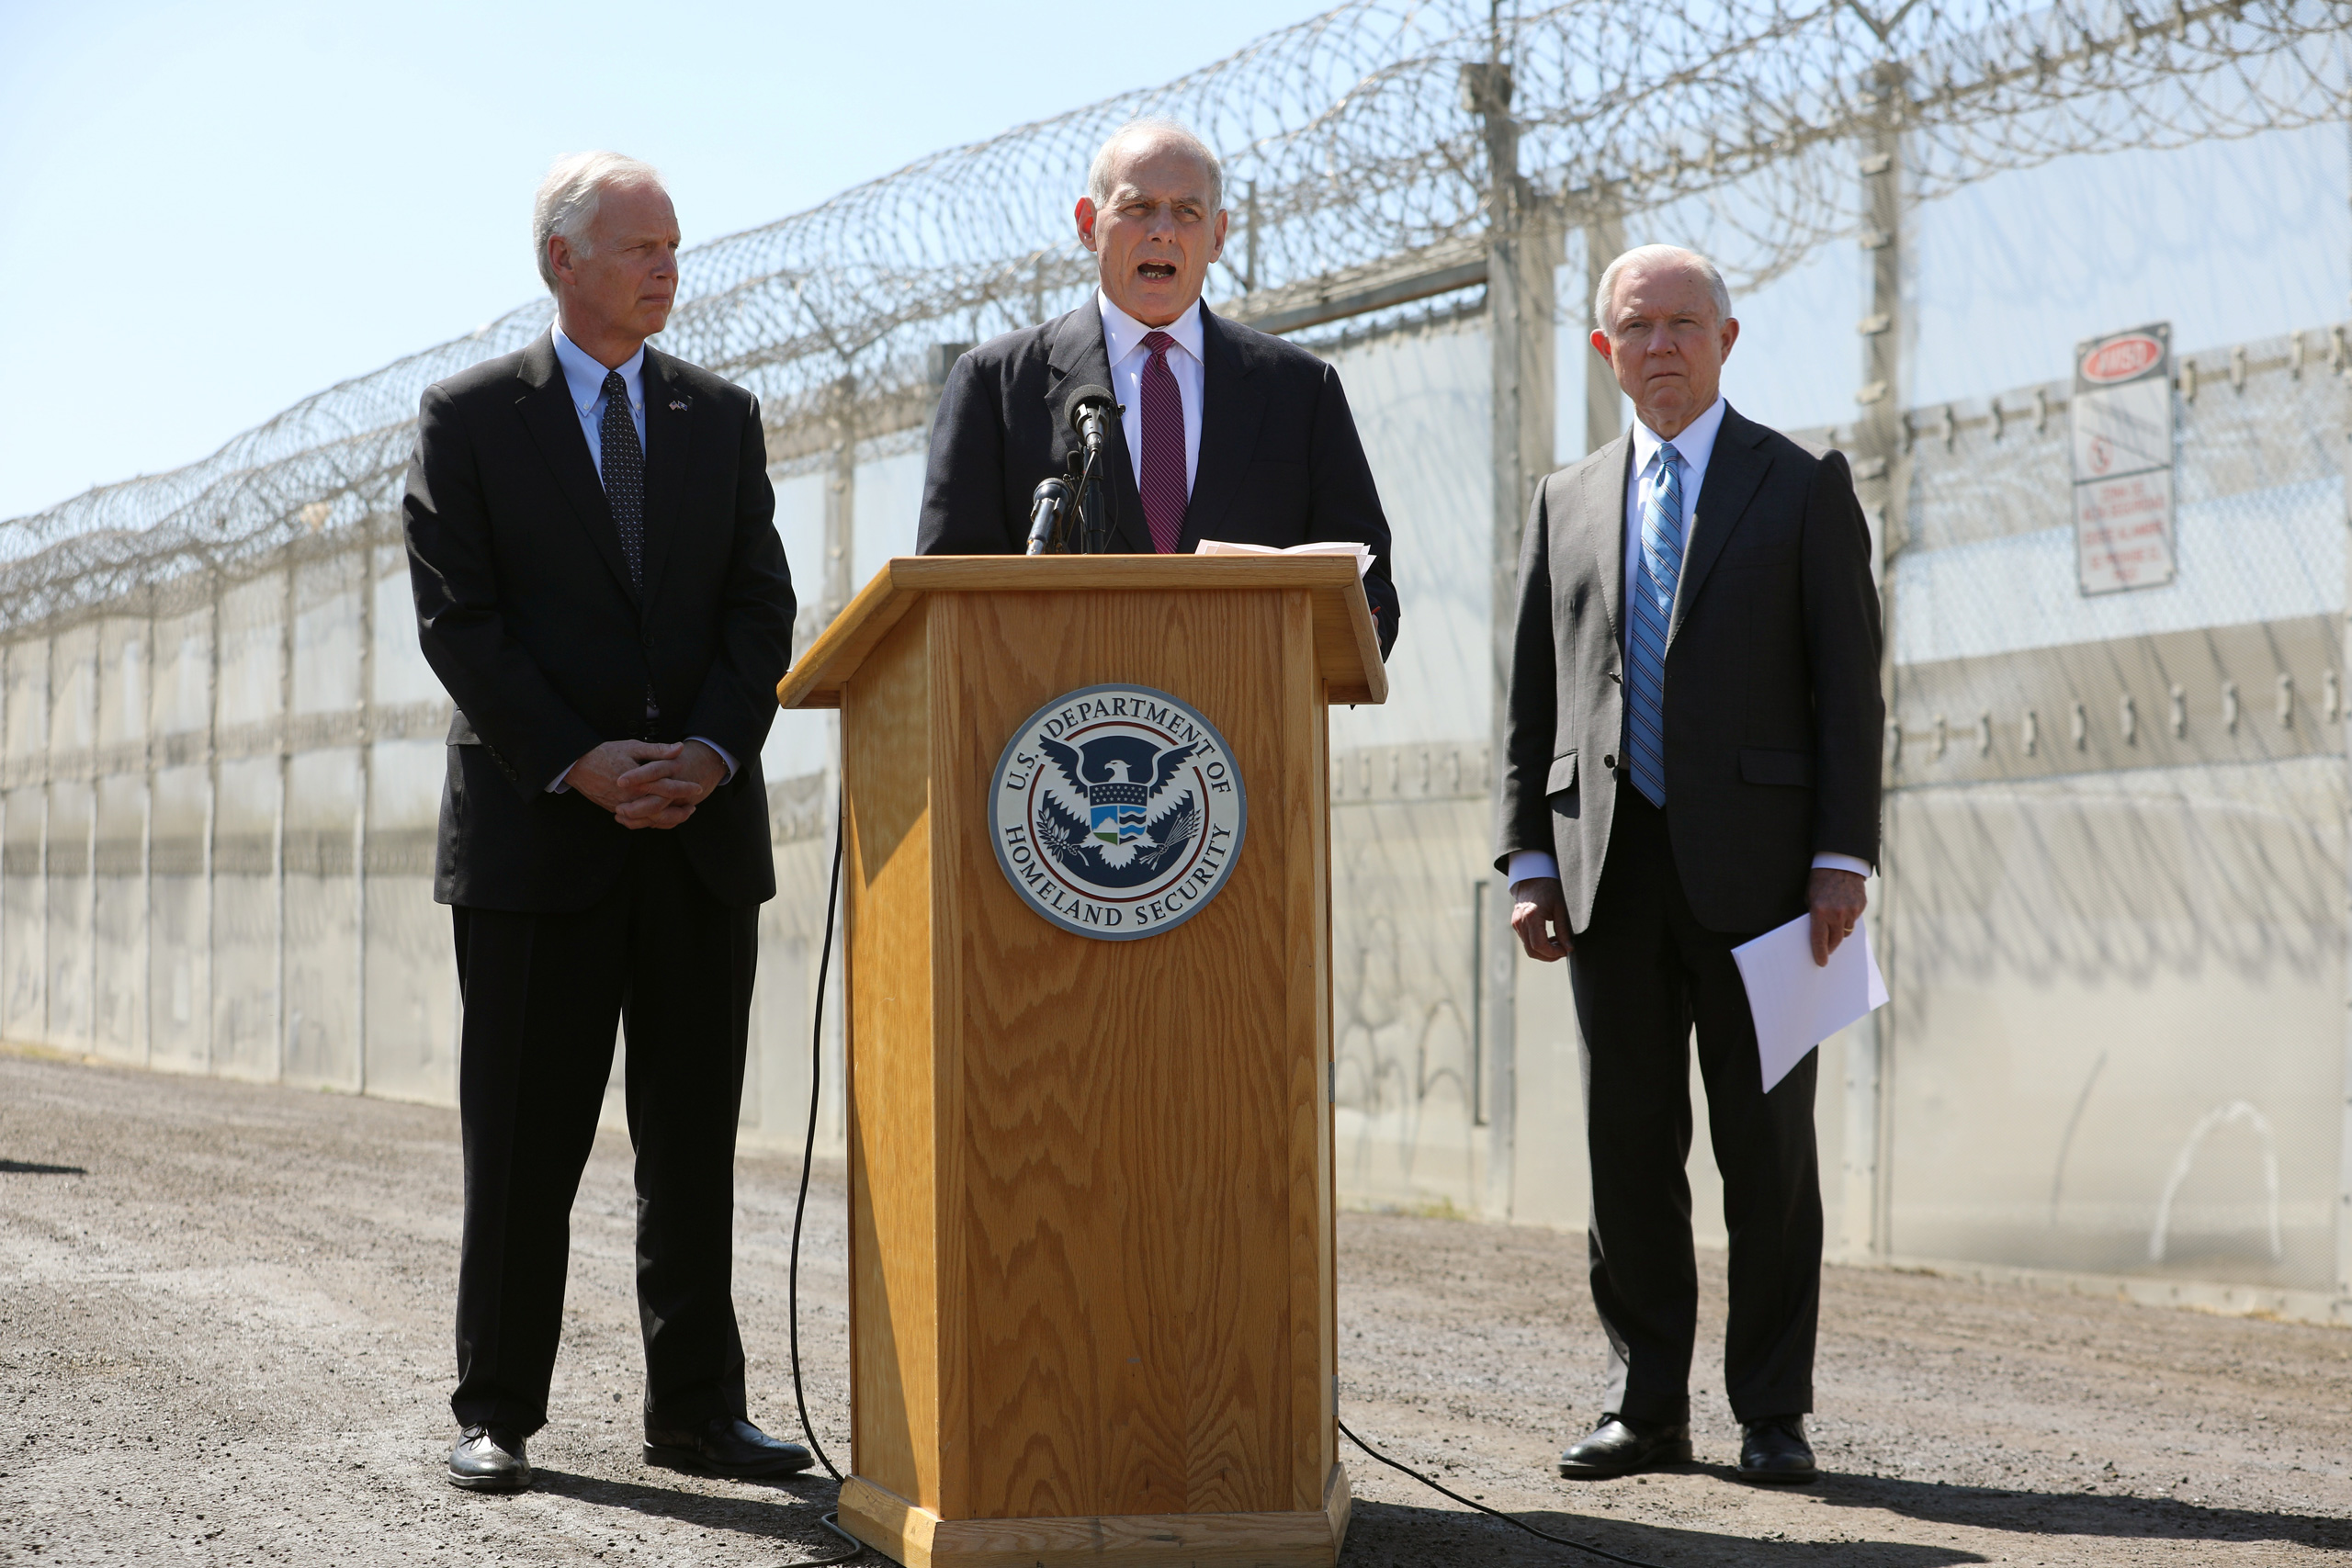 Secretary of Homeland Security John Kelly speaks as Attorney General Jeff Sessions and U.S. Senator Ron Johnson, Chairman of the Senate Committee on Homeland Security and Governmental Affairs listen during visit to the U.S. Mexico border fence in San Diego on April 21, 2017. (Mike Blake—Reuters)